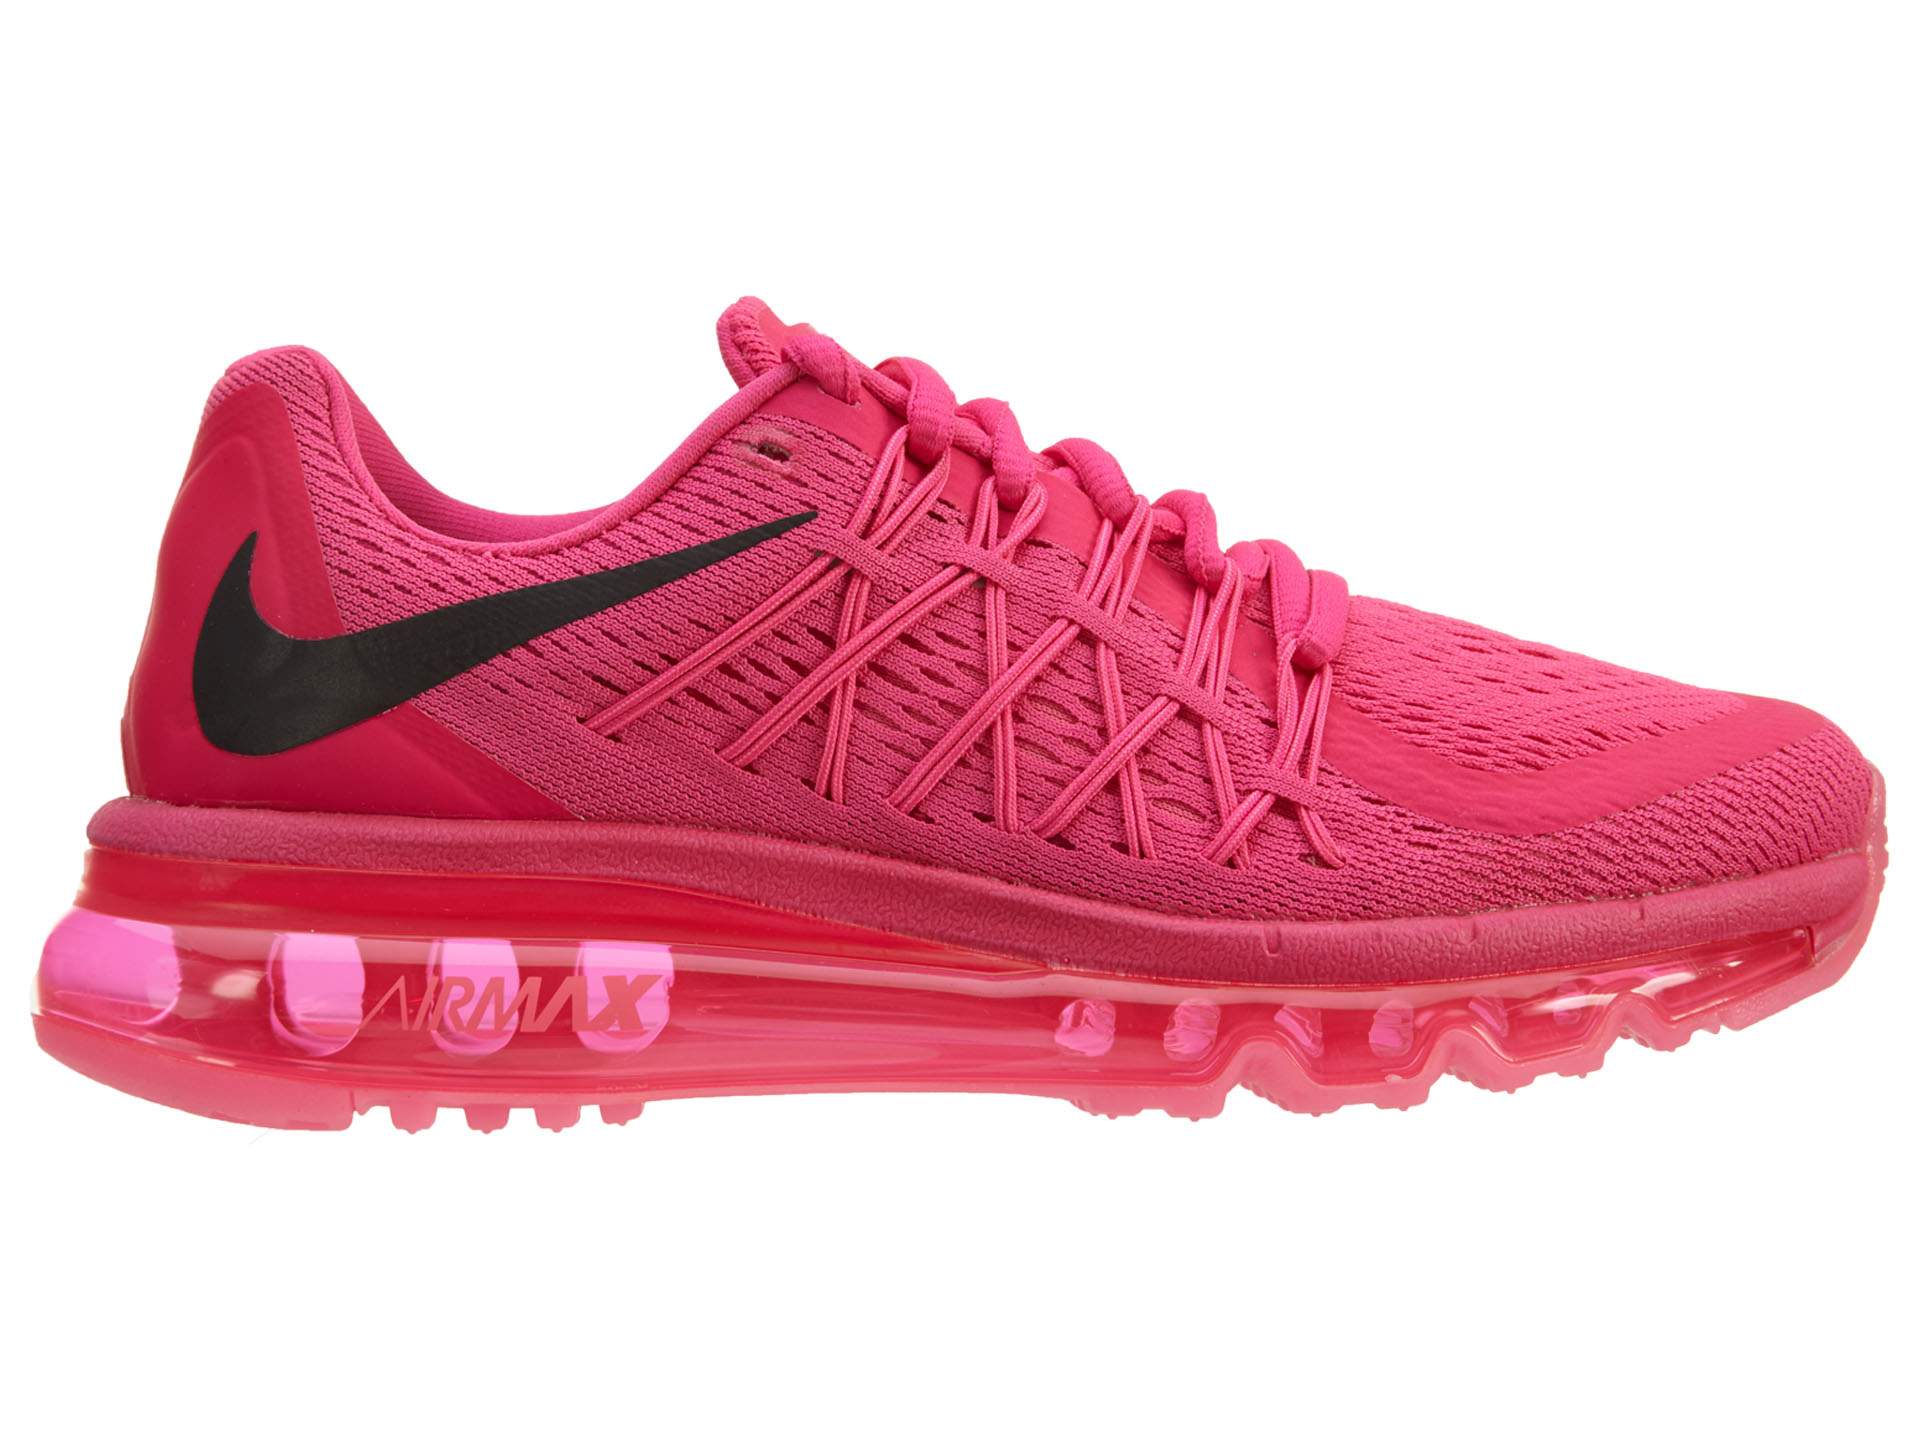 repetitie attribuut bubbel Nike Air Max 2015 Pink Foil Black-Pink Pow (W) 698903-600